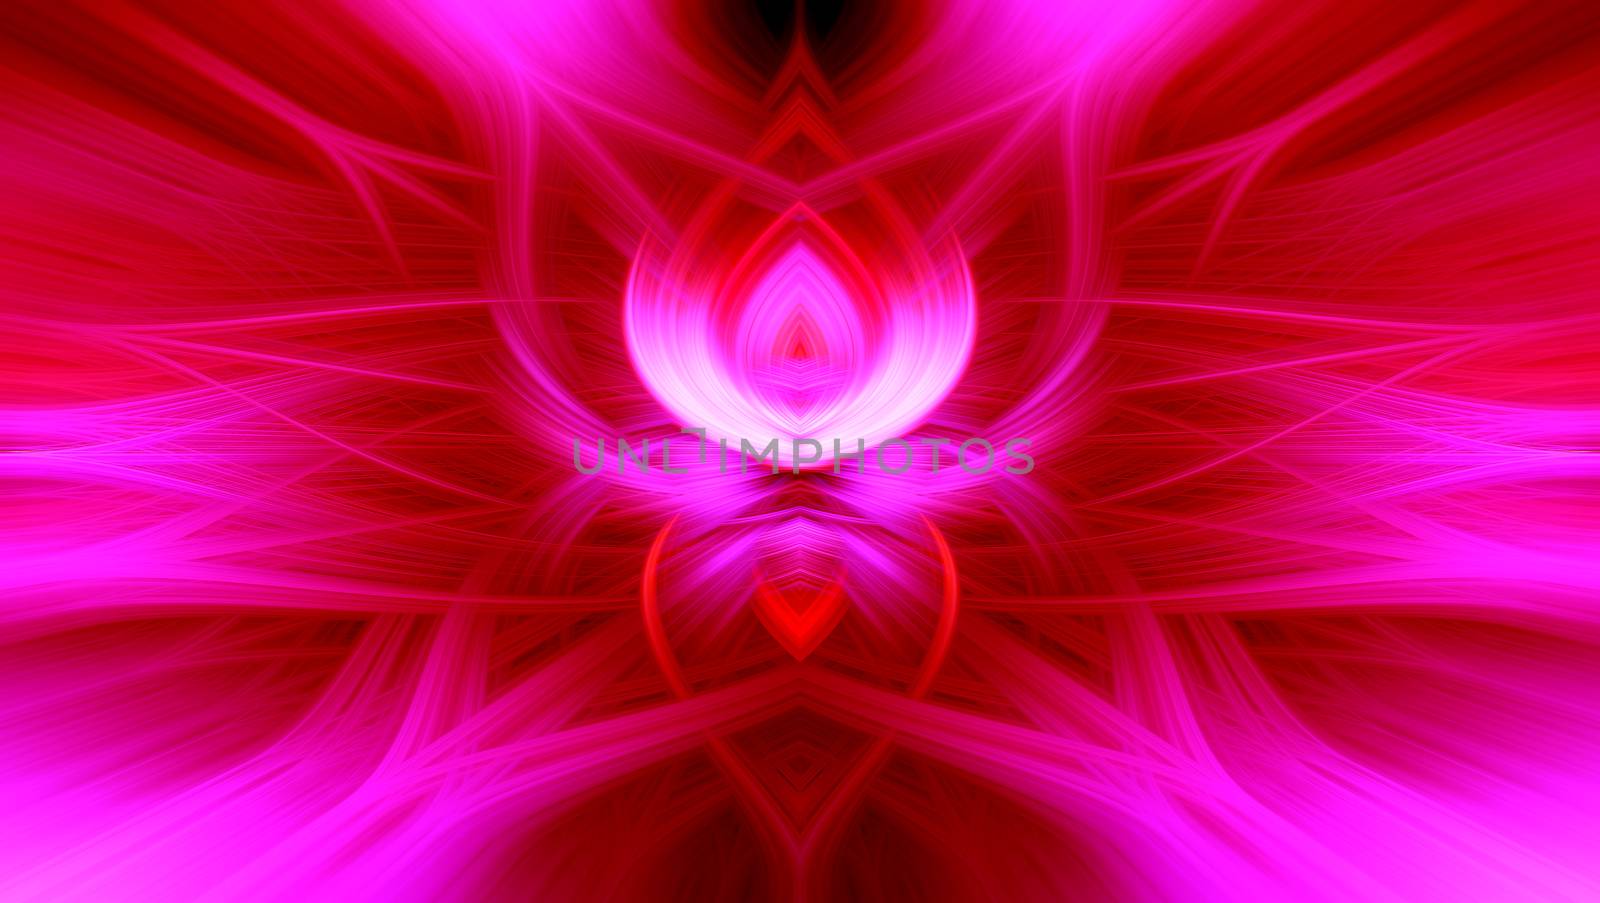 Beautiful abstract intertwined 3d fibers forming a shape of sparkle, flame, flower, interlinked hearts. Pink, purple, maroon and red colors. Illustration.